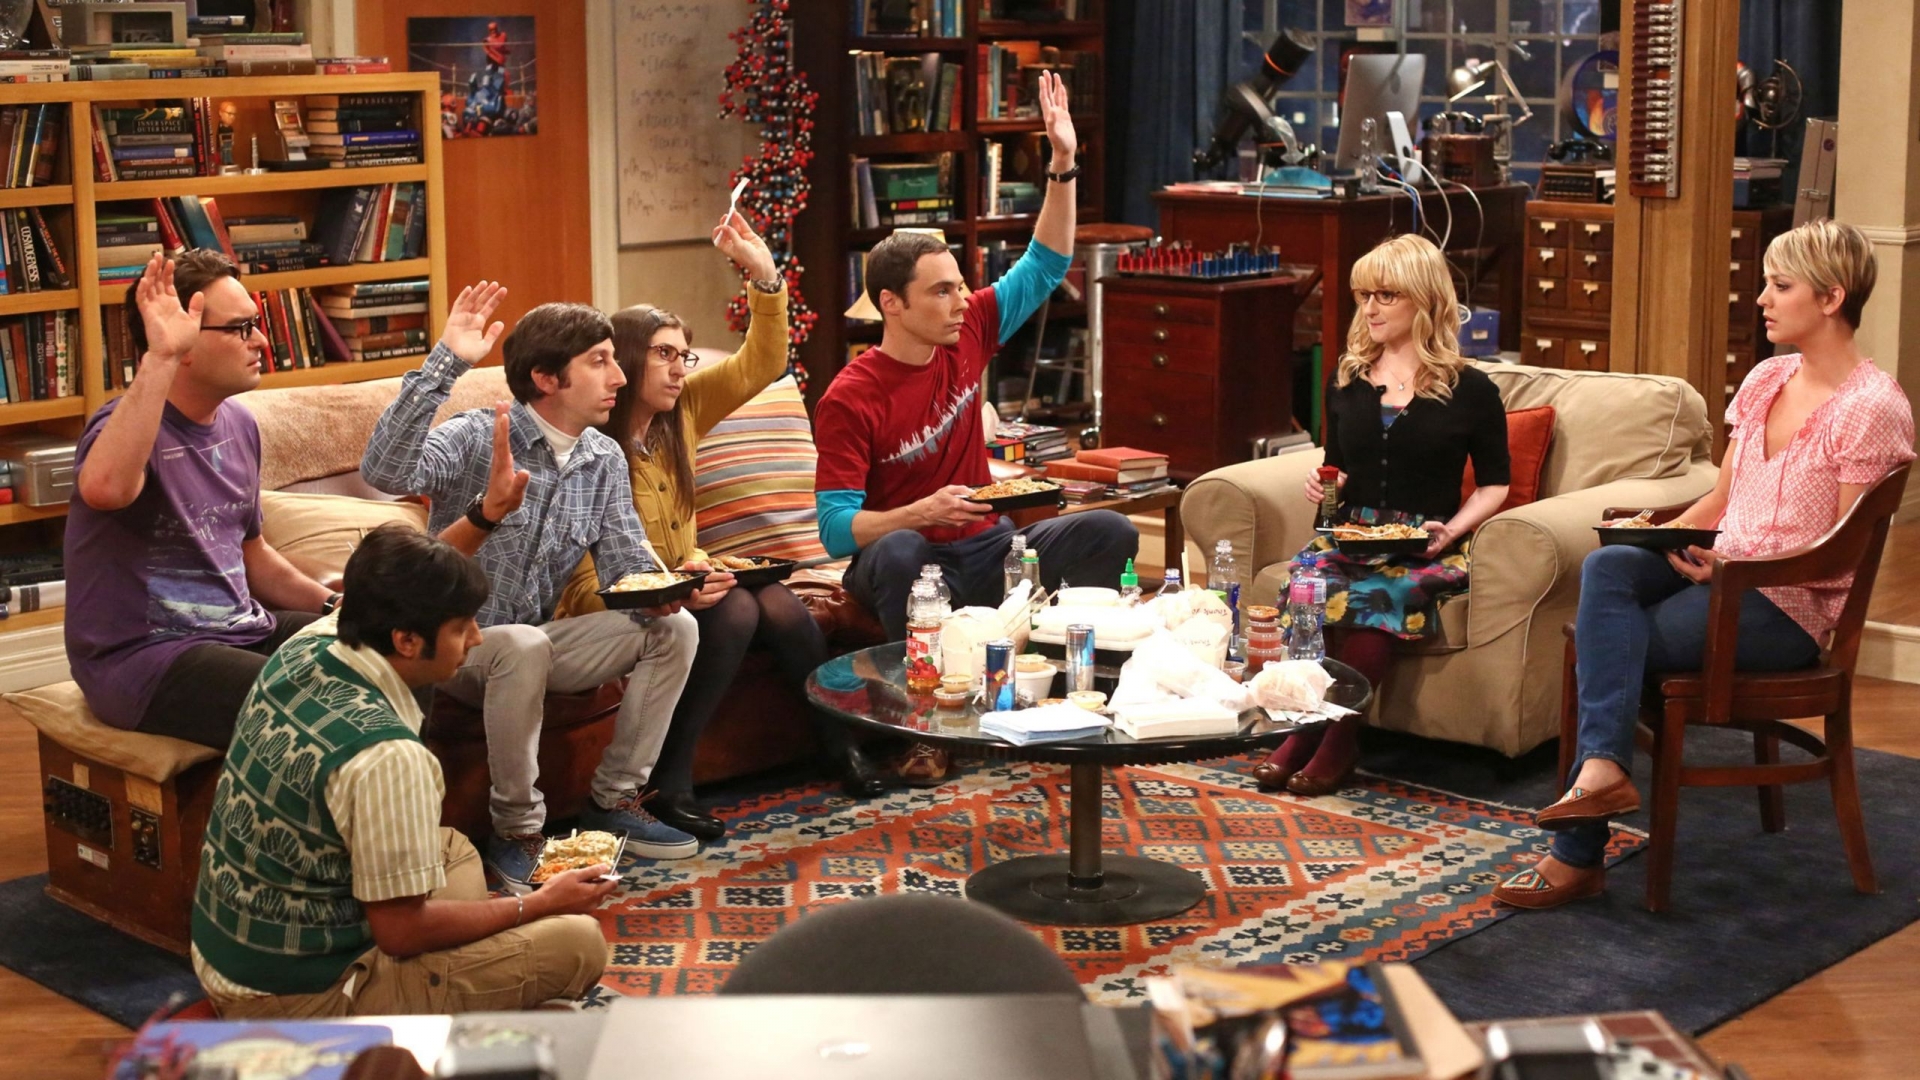 The Big Bang Theory Scene for 1920 x 1080 HDTV 1080p resolution